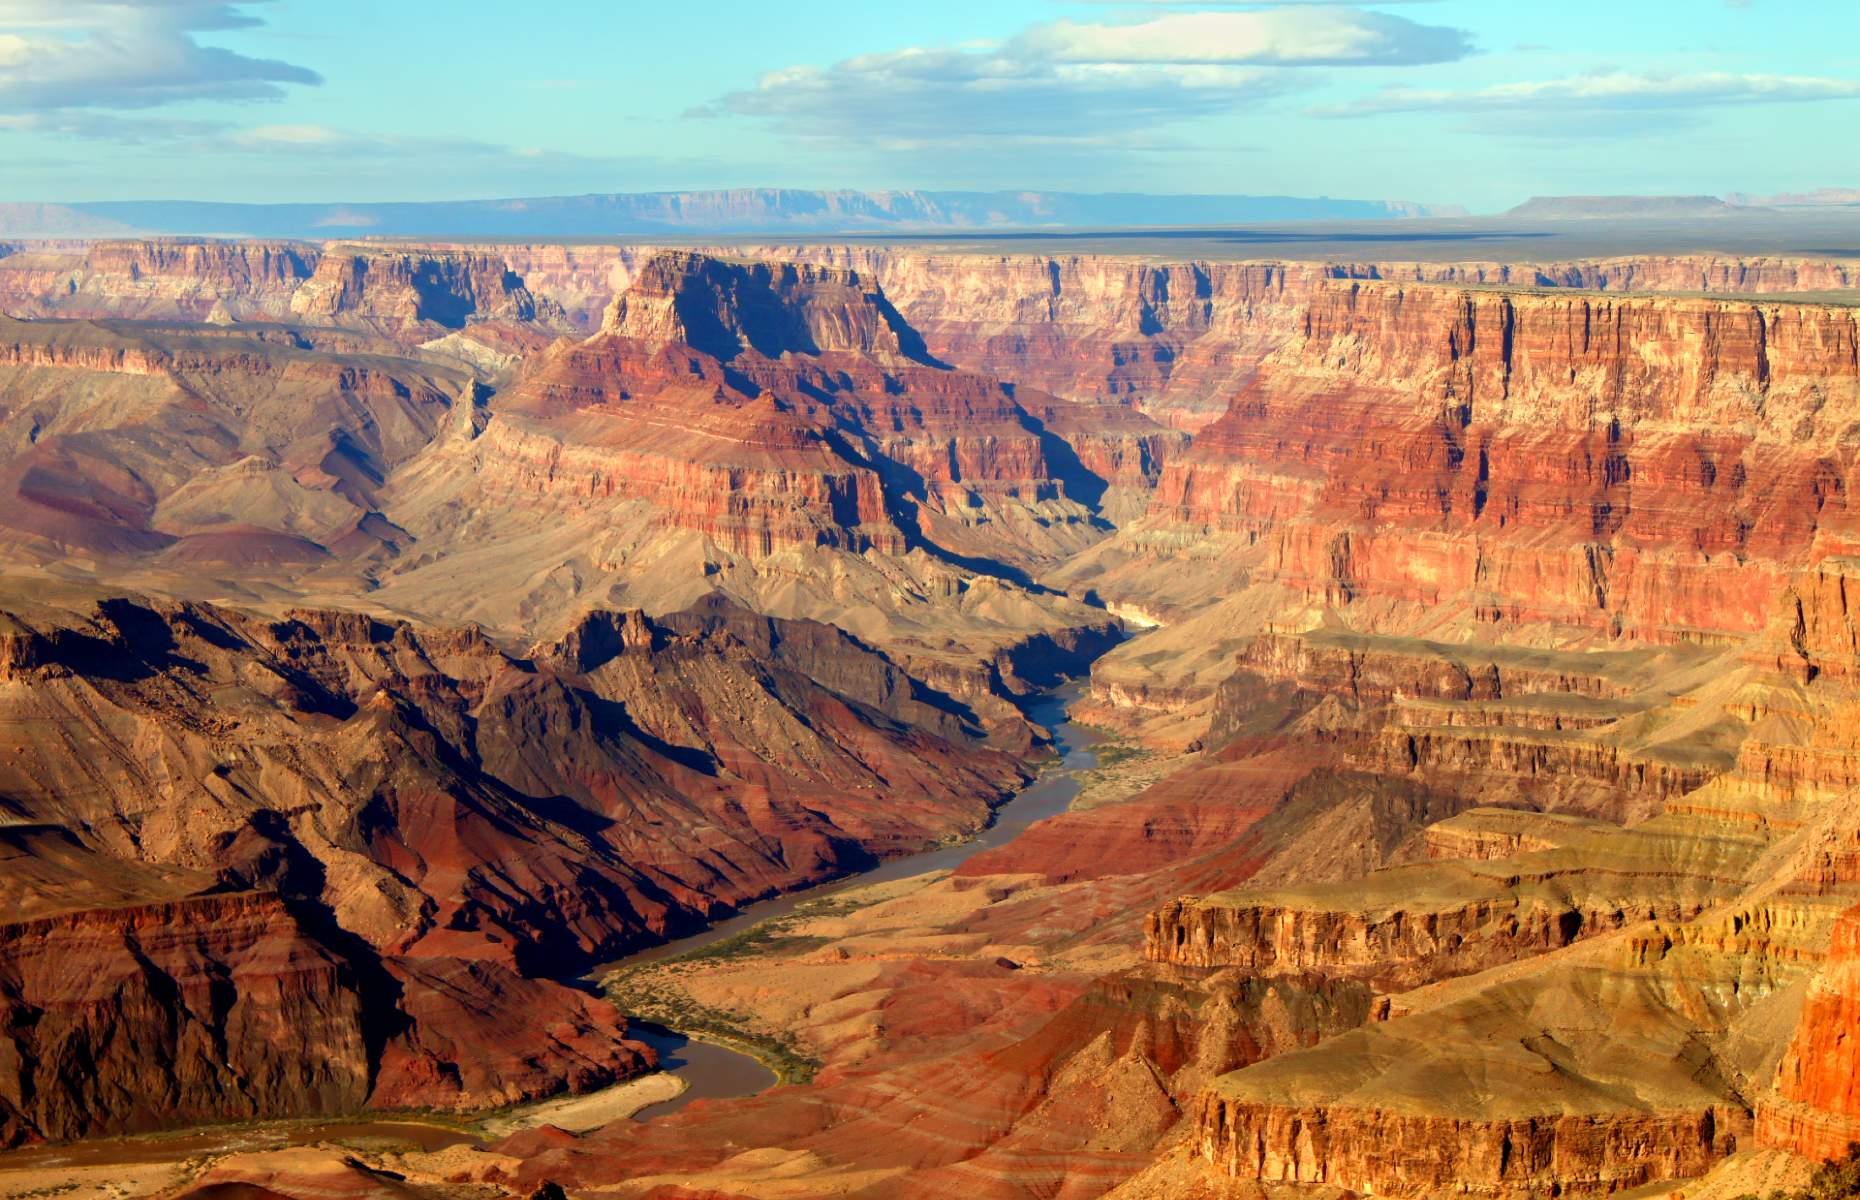 <p>We simply couldn't not include the Grand Canyon, which is easily the state’s most iconic attraction – and indeed one of the most popular sites in the US. This 6,000-foot-deep (1,828m), 277-mile-long (446km) canyon in northern Arizona has fascinated generations of visitors with its striking layers of red rock and labyrinthine gorge. Even though it brings in around <a href="https://explorethecanyon.com/grand-canyon-facts/">five million people each year</a>, it’s still possible to beat the crowds. Try going to the lesser-known North Rim, visiting at sunrise or during the quieter seasons of spring and fall. </p>